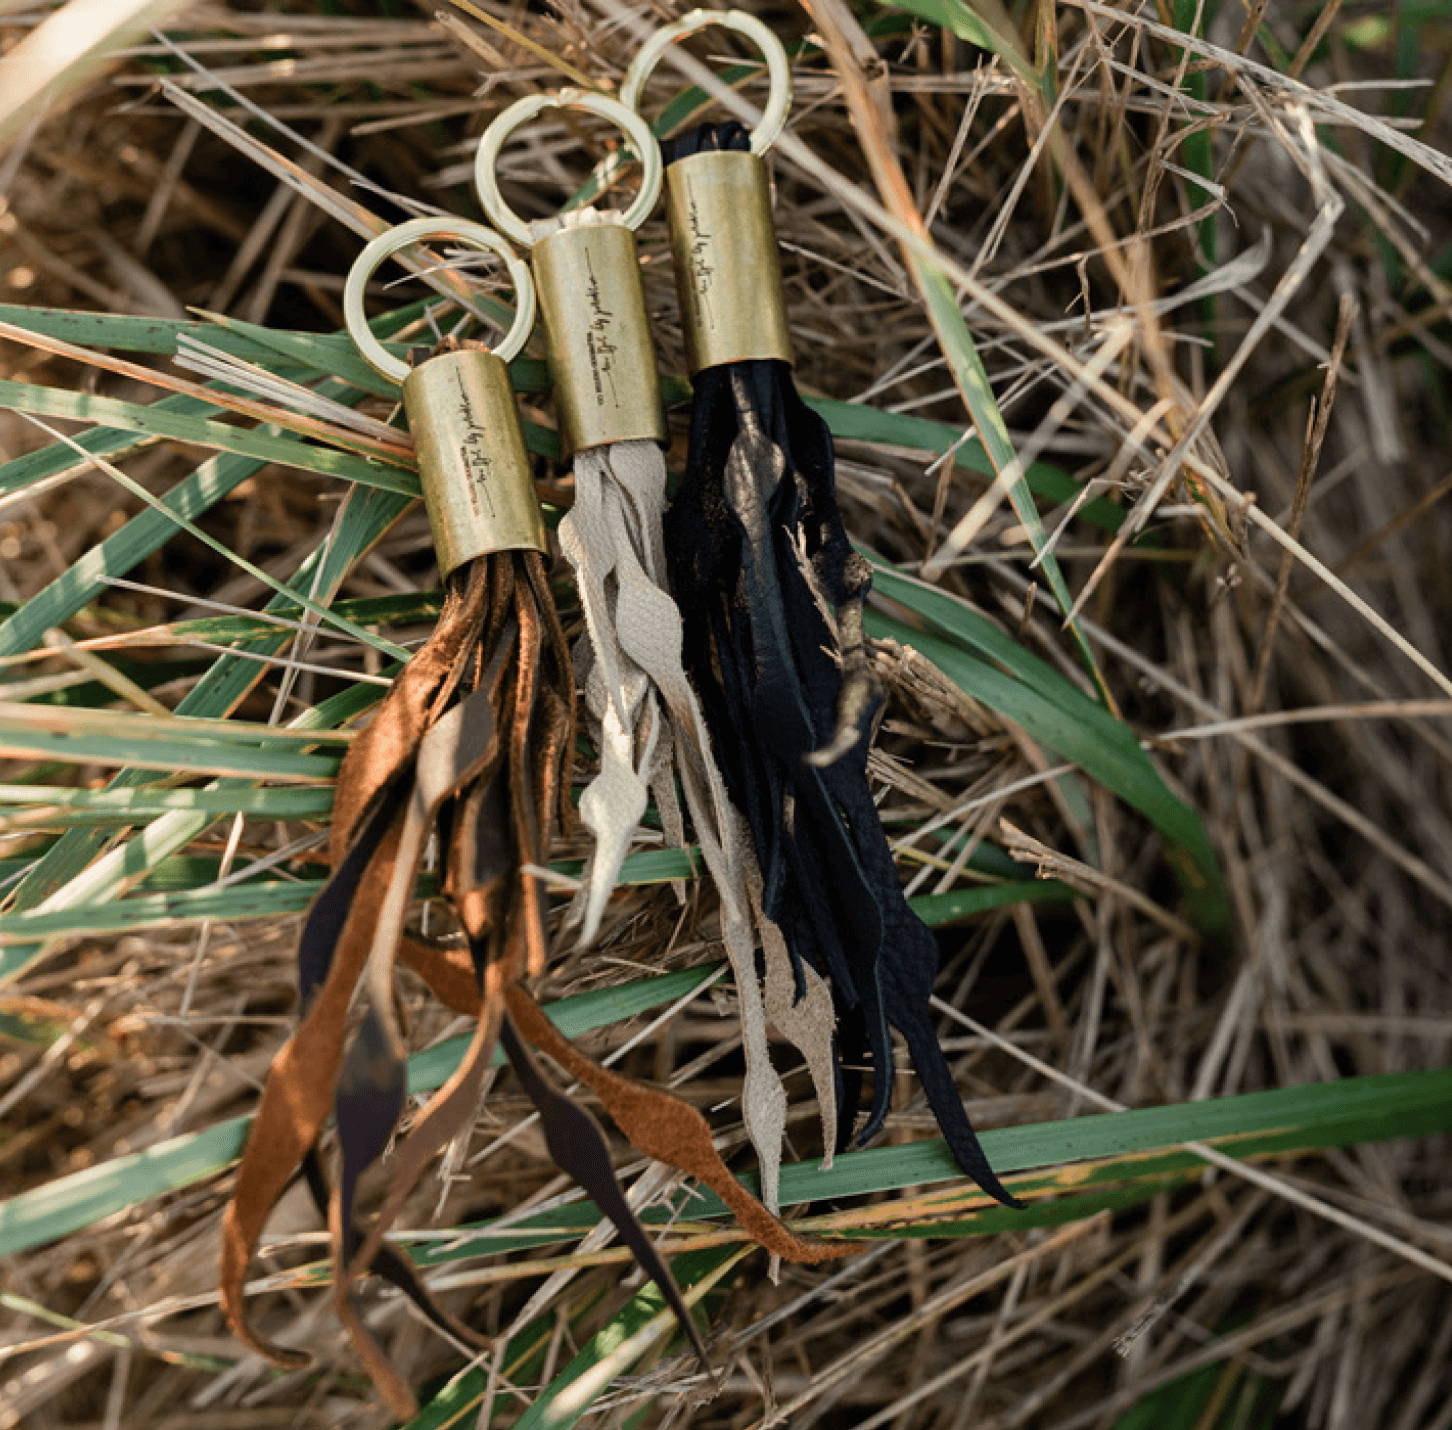 brown gold and black leather keychains on the beach grass